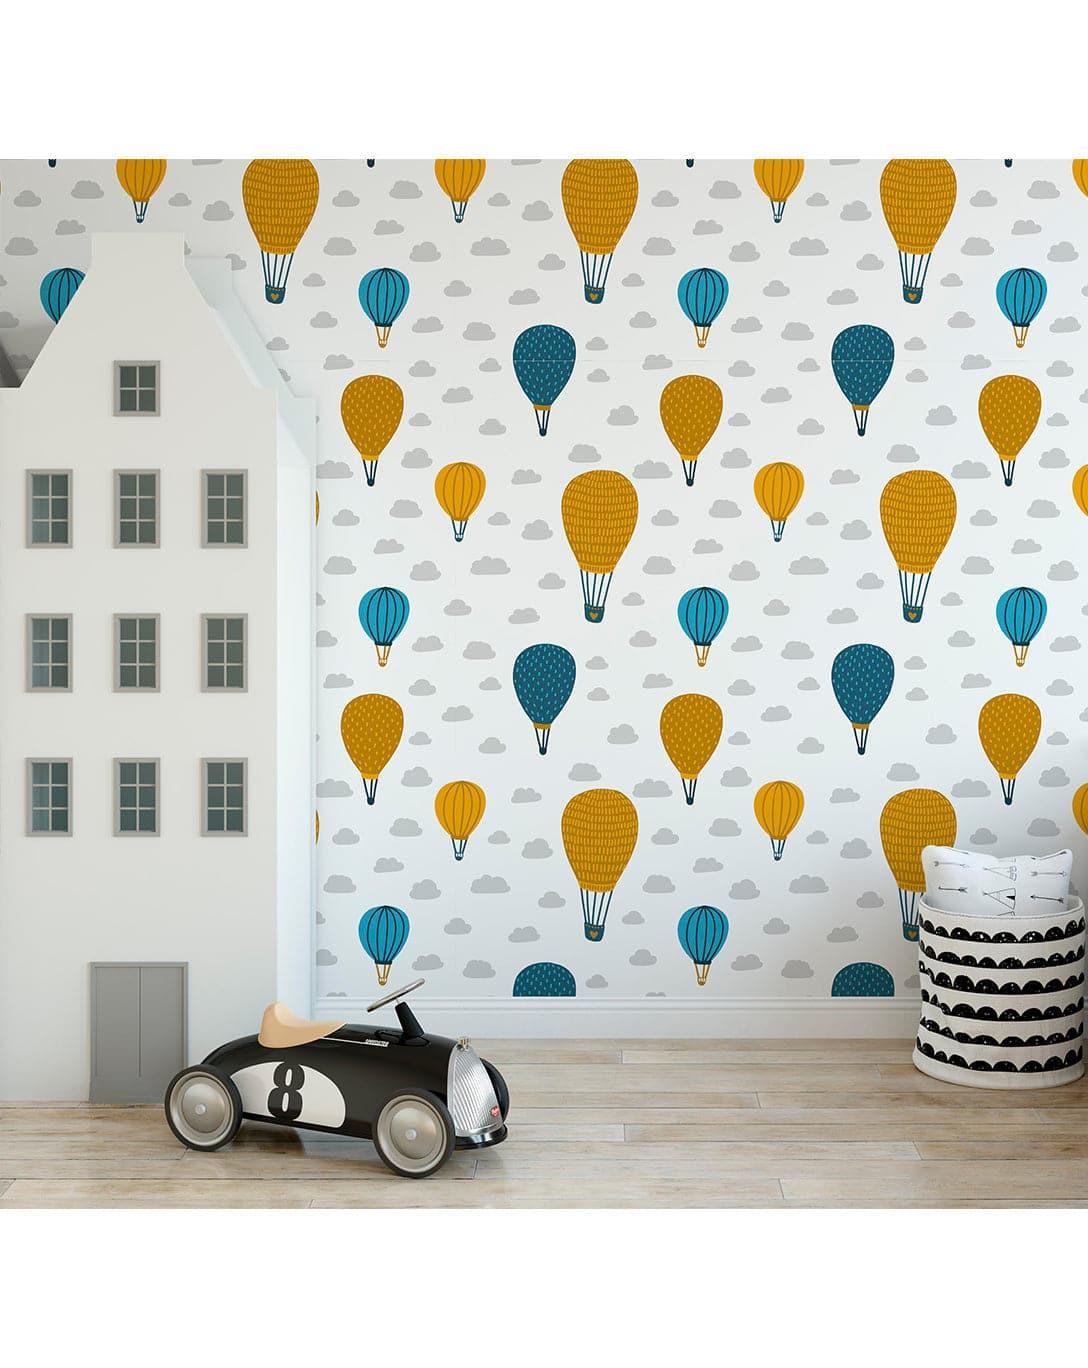 Kids Room Air Balloons in Sky Removable Wallpaper Kids Room Air Balloons in Sky Removable Wallpaper Kids Room Air Balloons in Sky Removable Wallpaper 